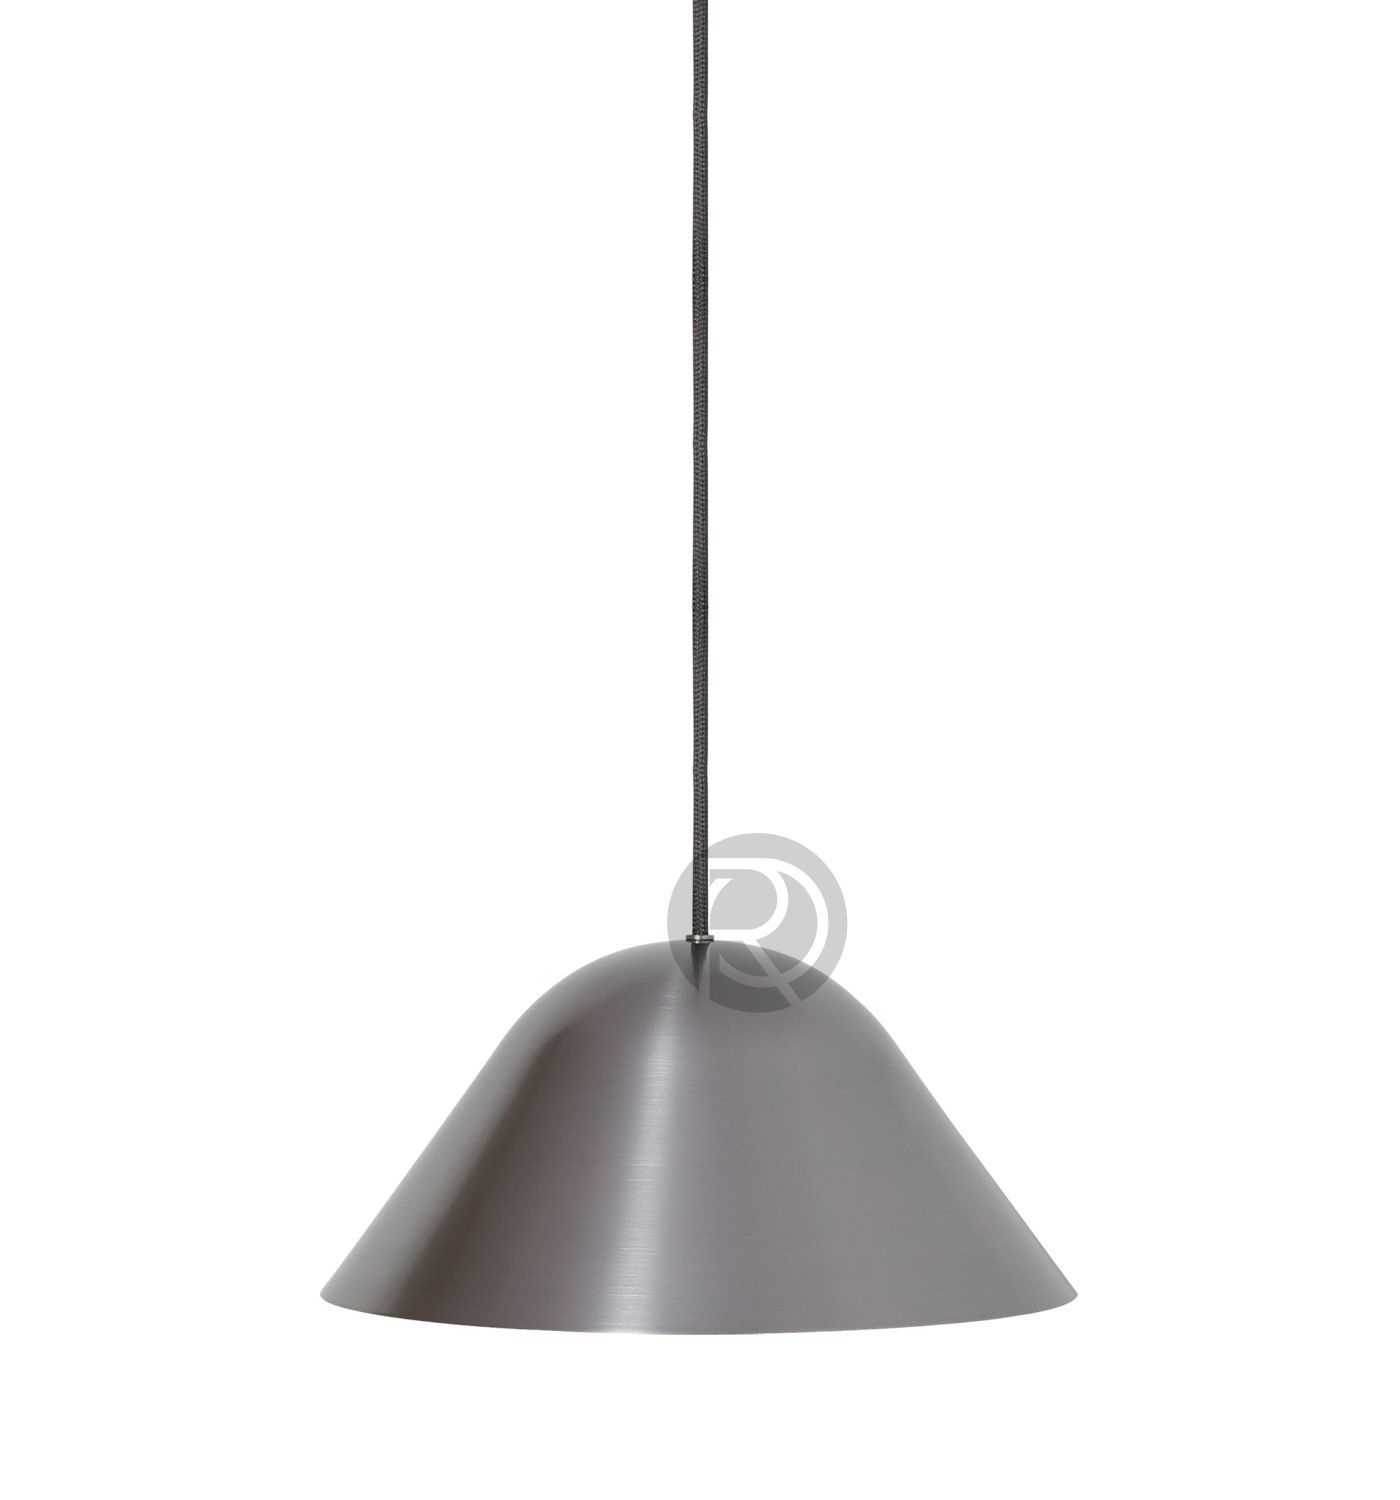 Pendant lamp CASSIS by RUBN